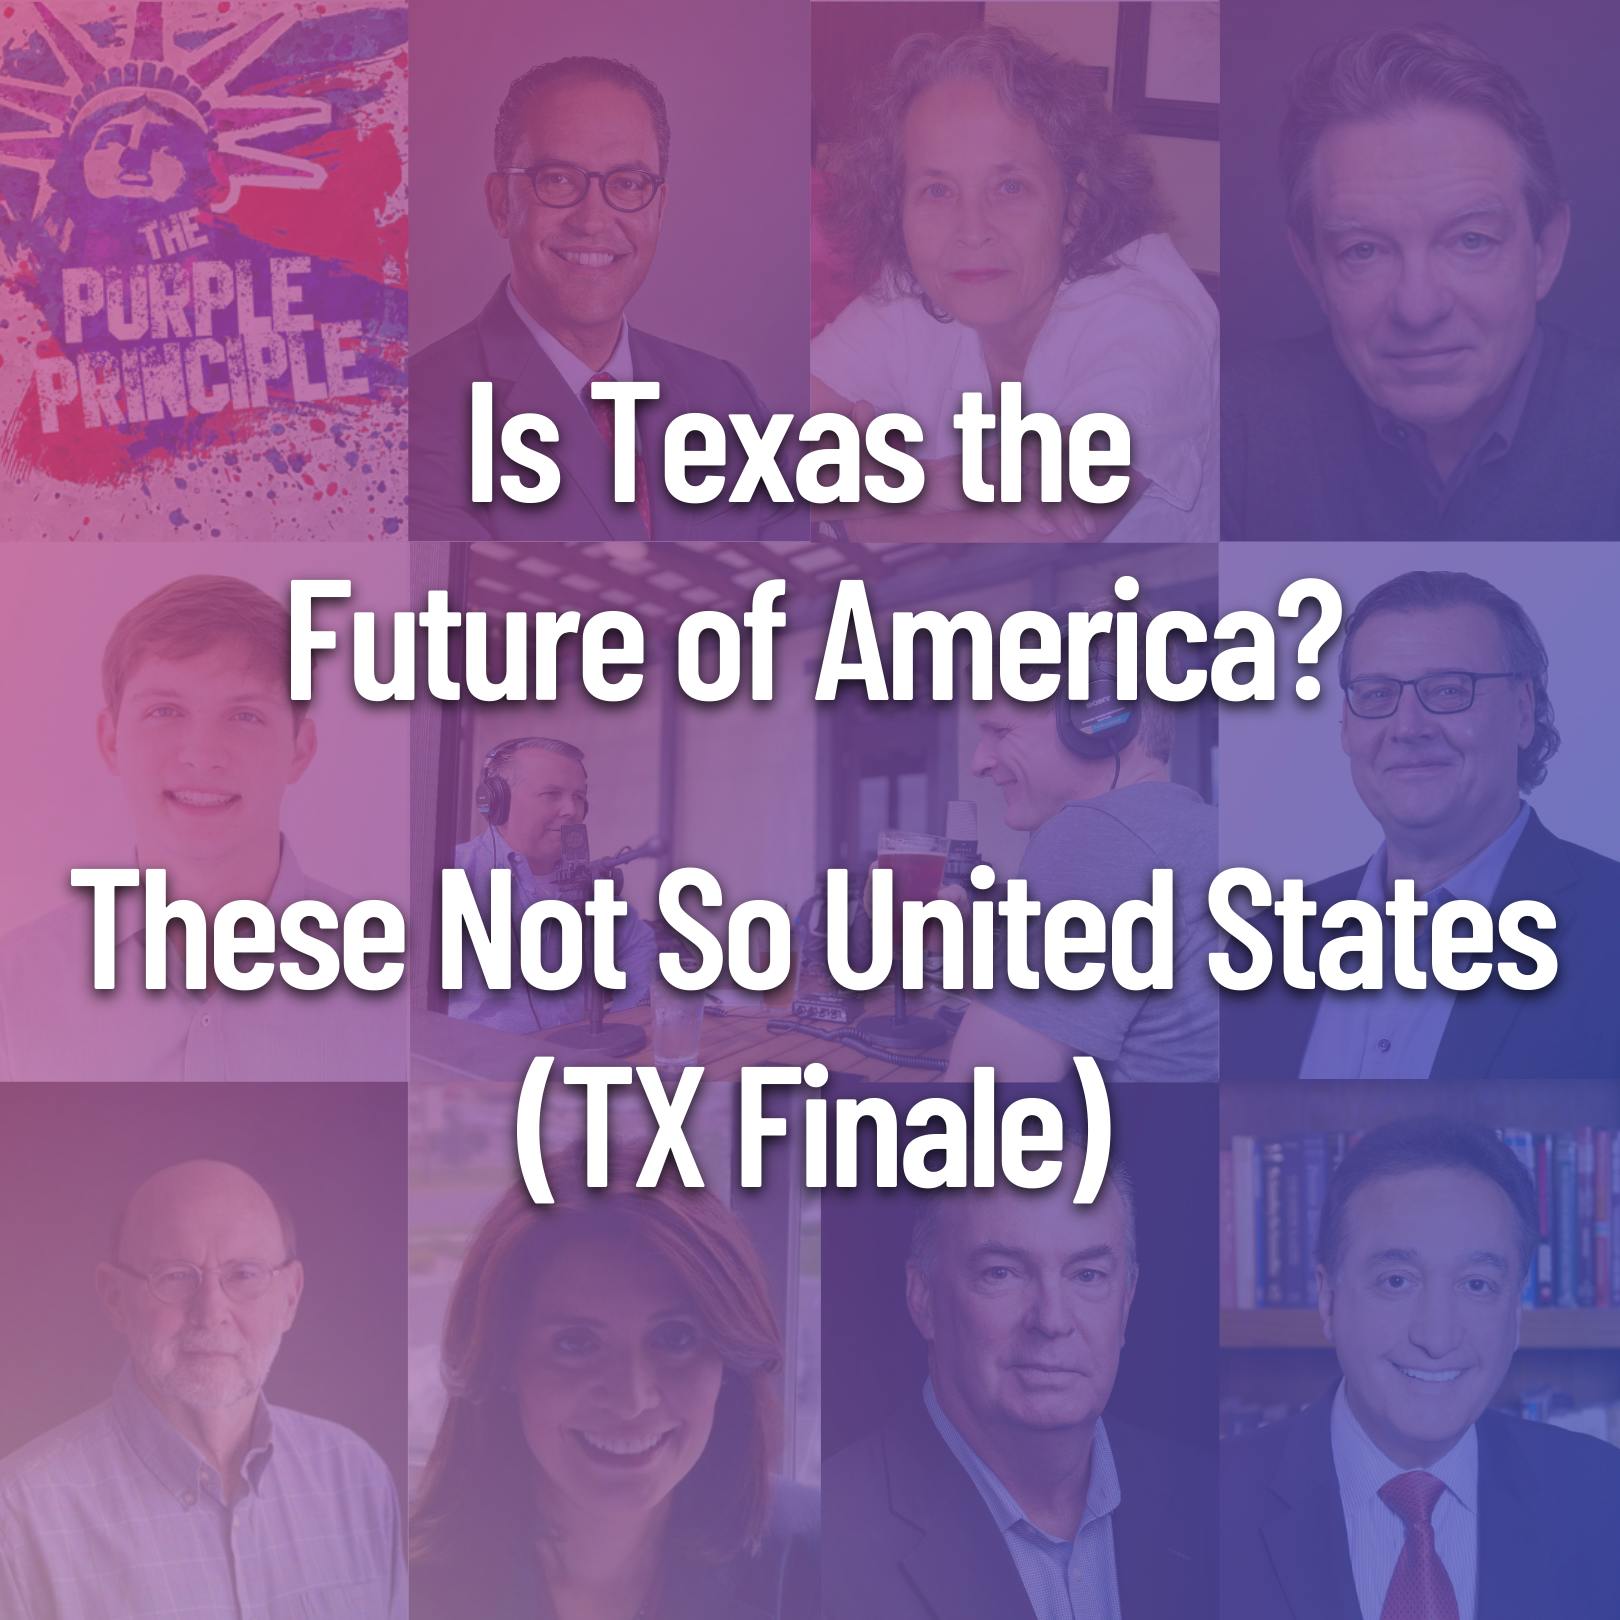 Is Texas the Future of America? These Not So United States (TX Finale)